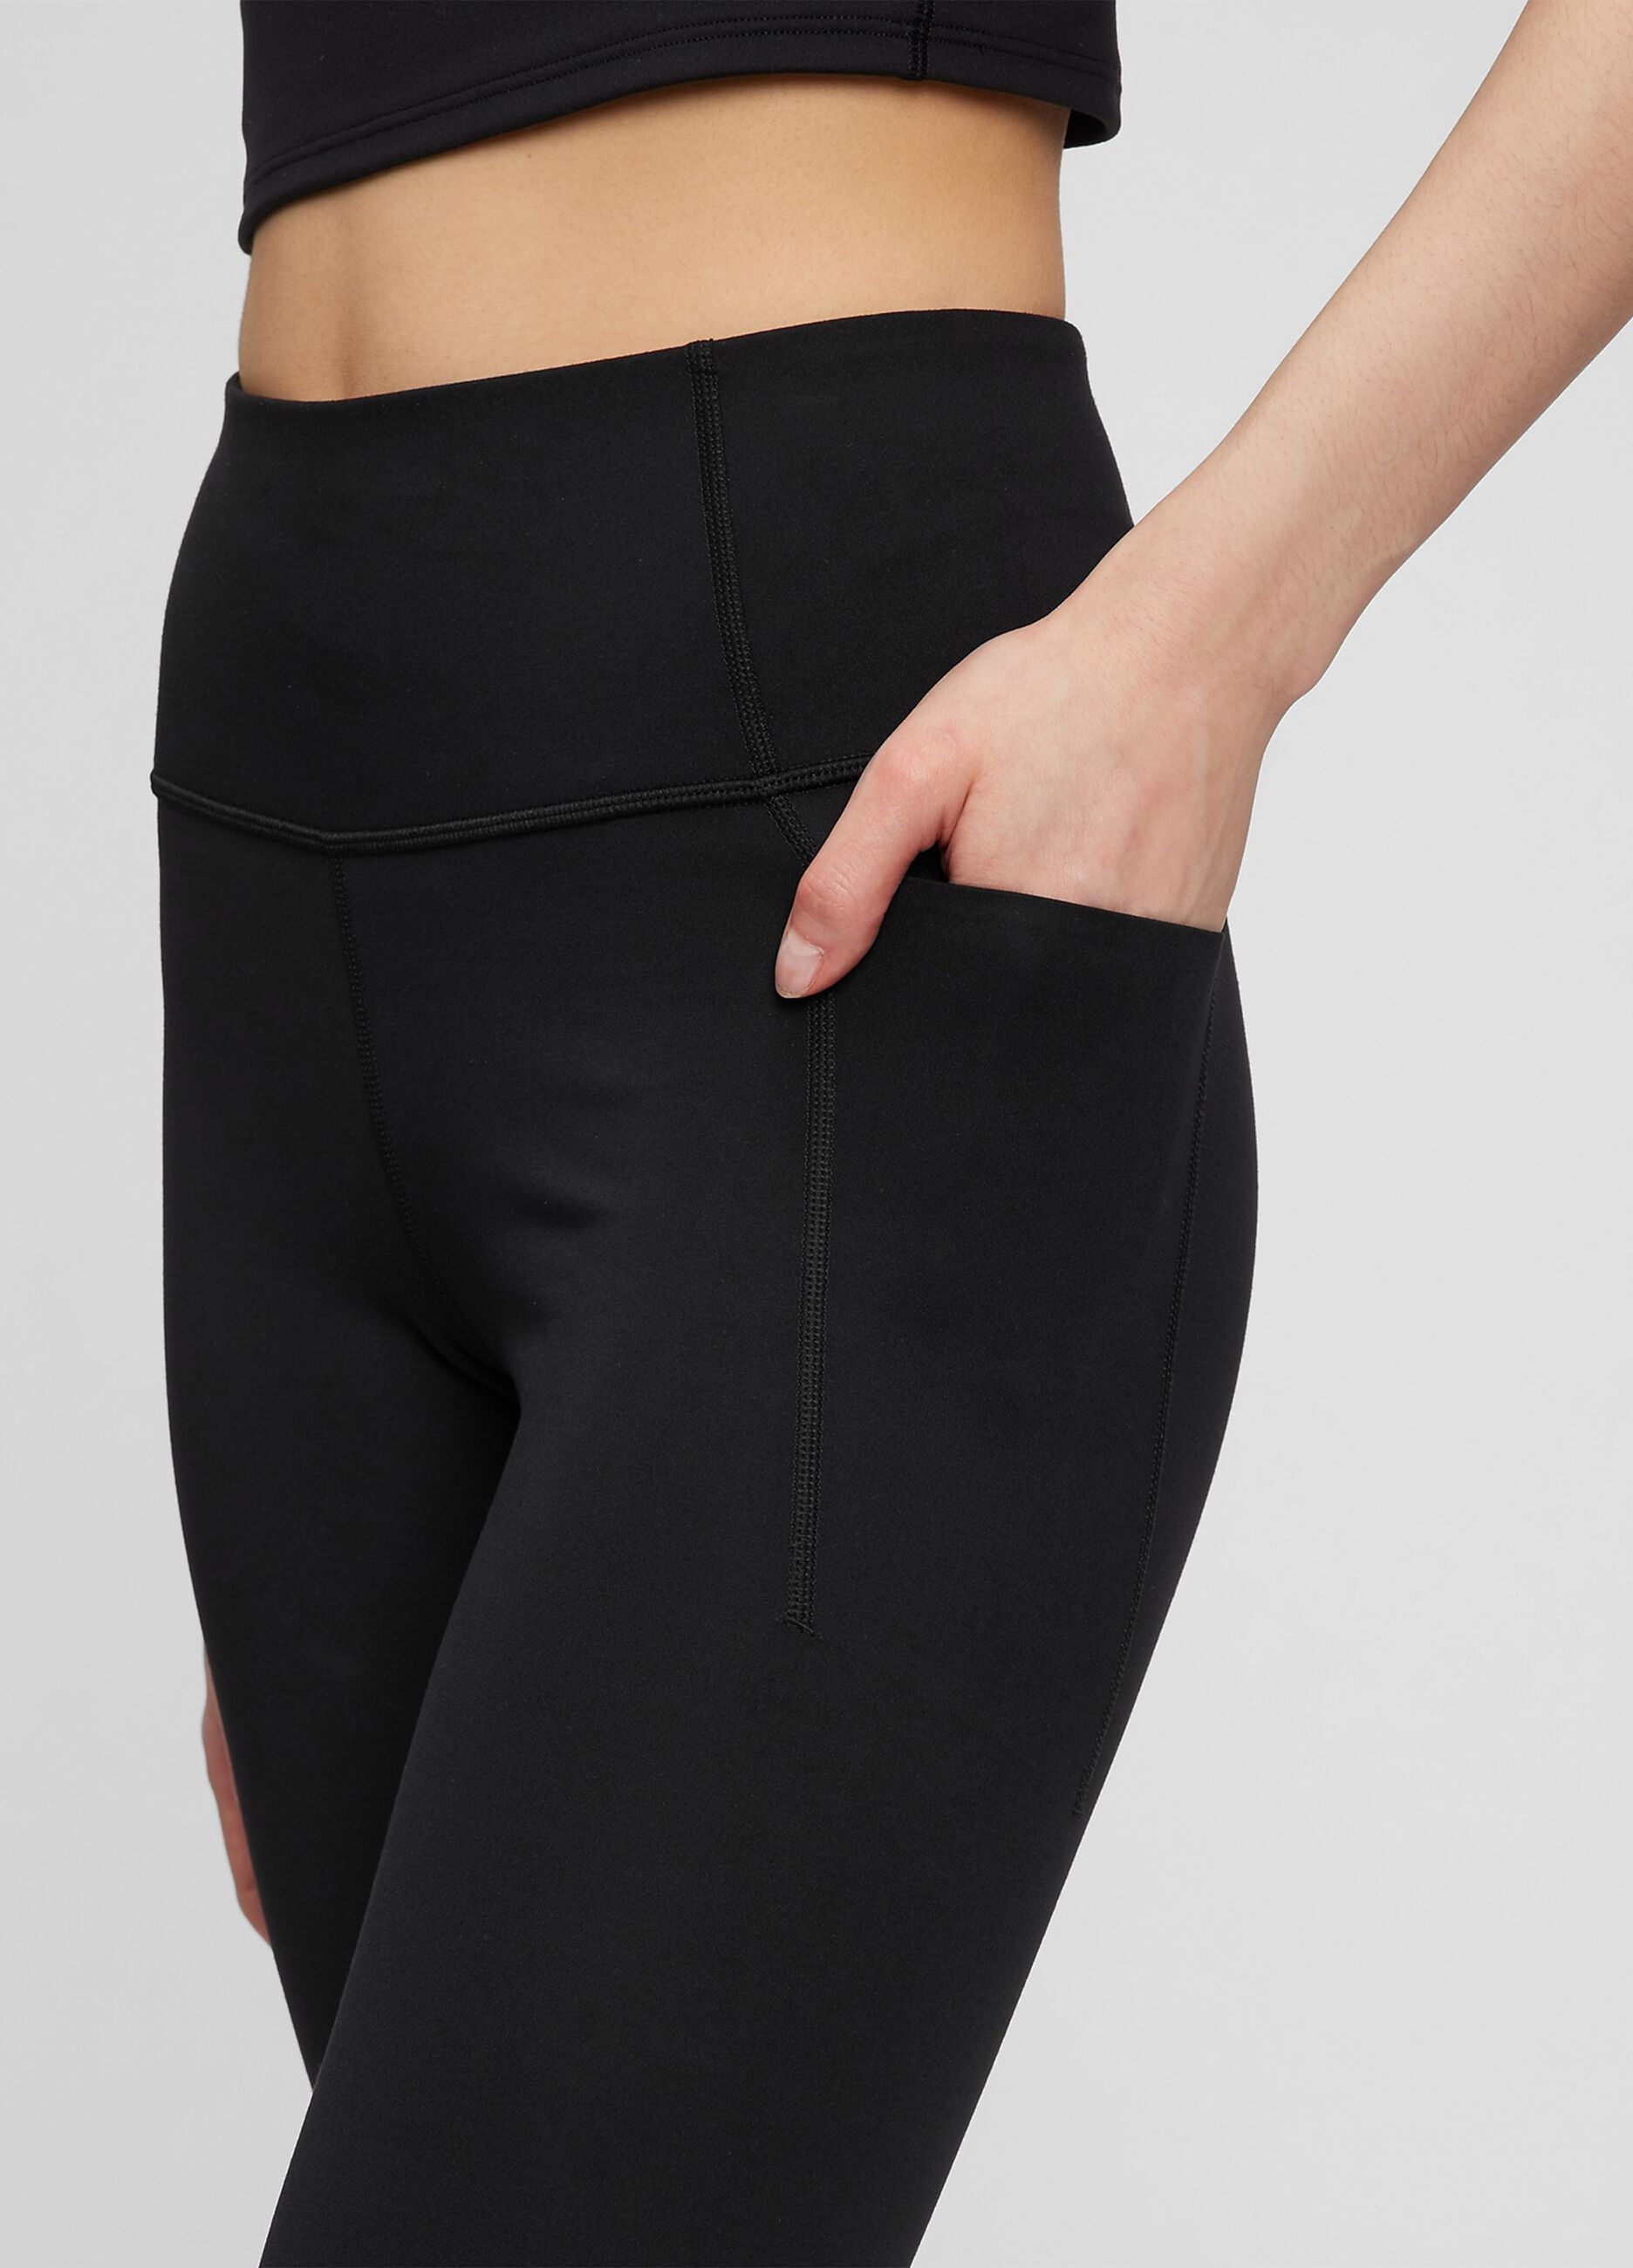 Stretch leggings with pockets